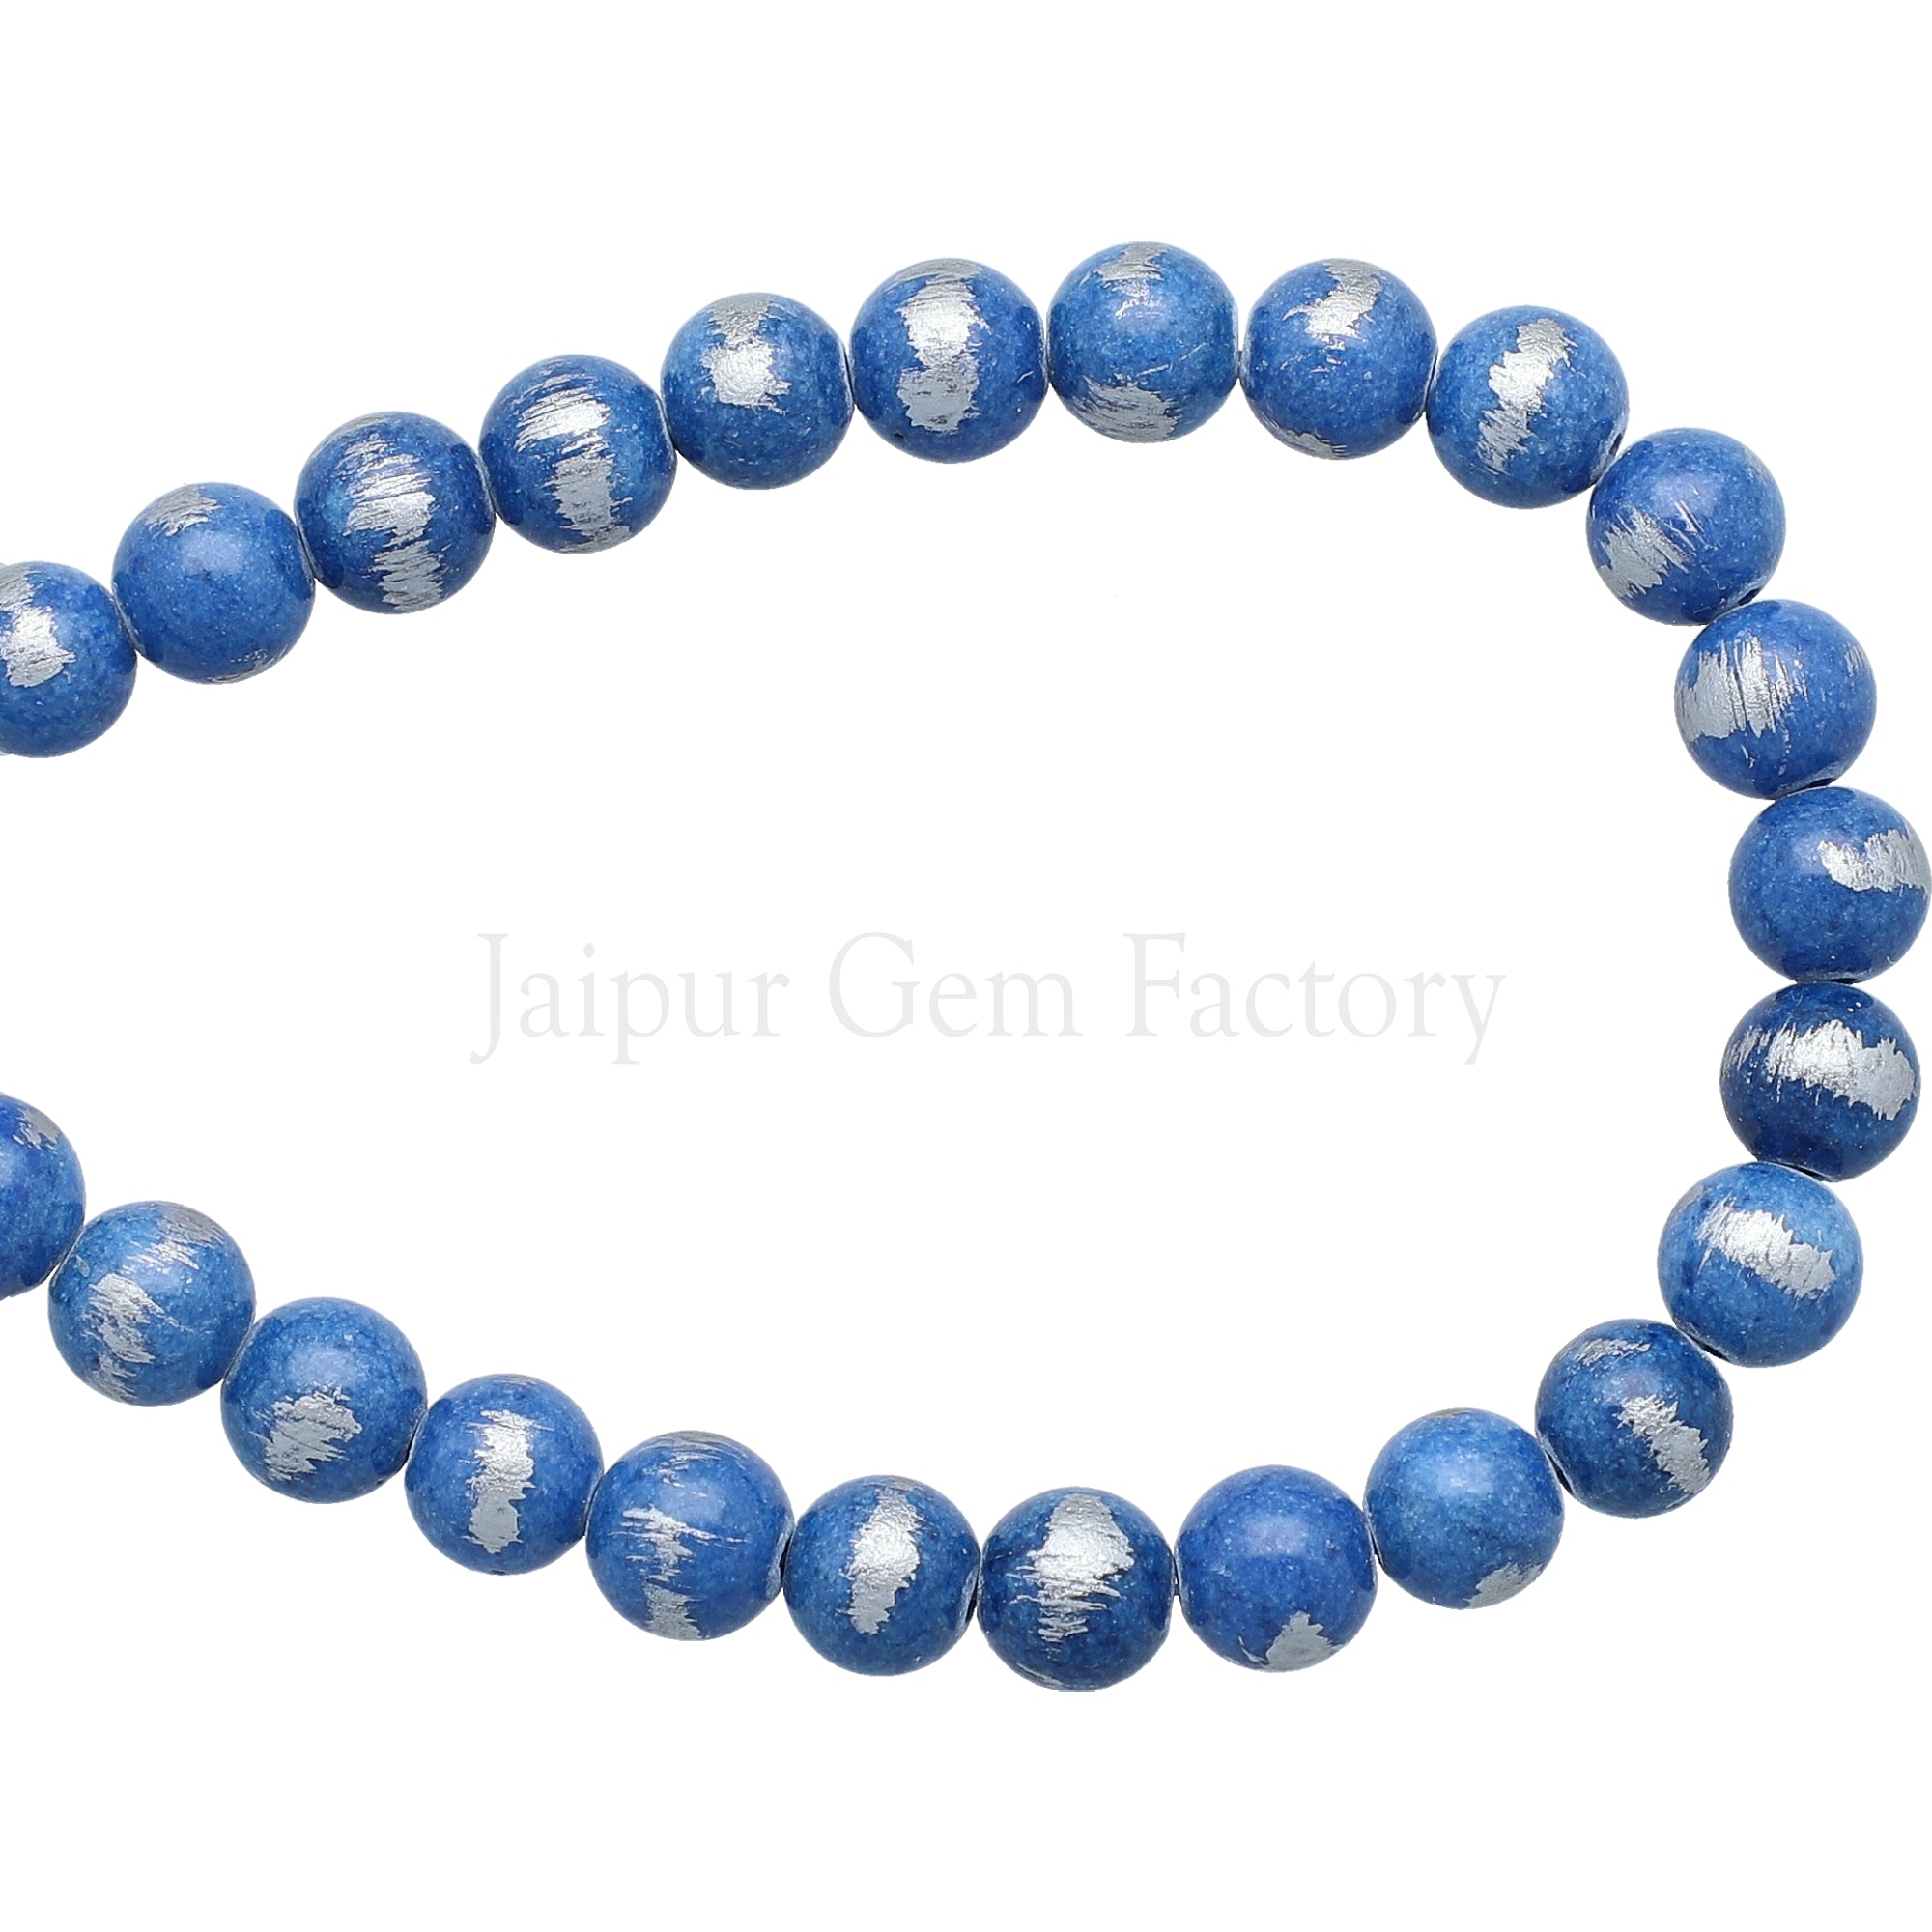 8 MM Denim Blue With Silver Foil Jade Smooth Round Beads 15 Inches Strand